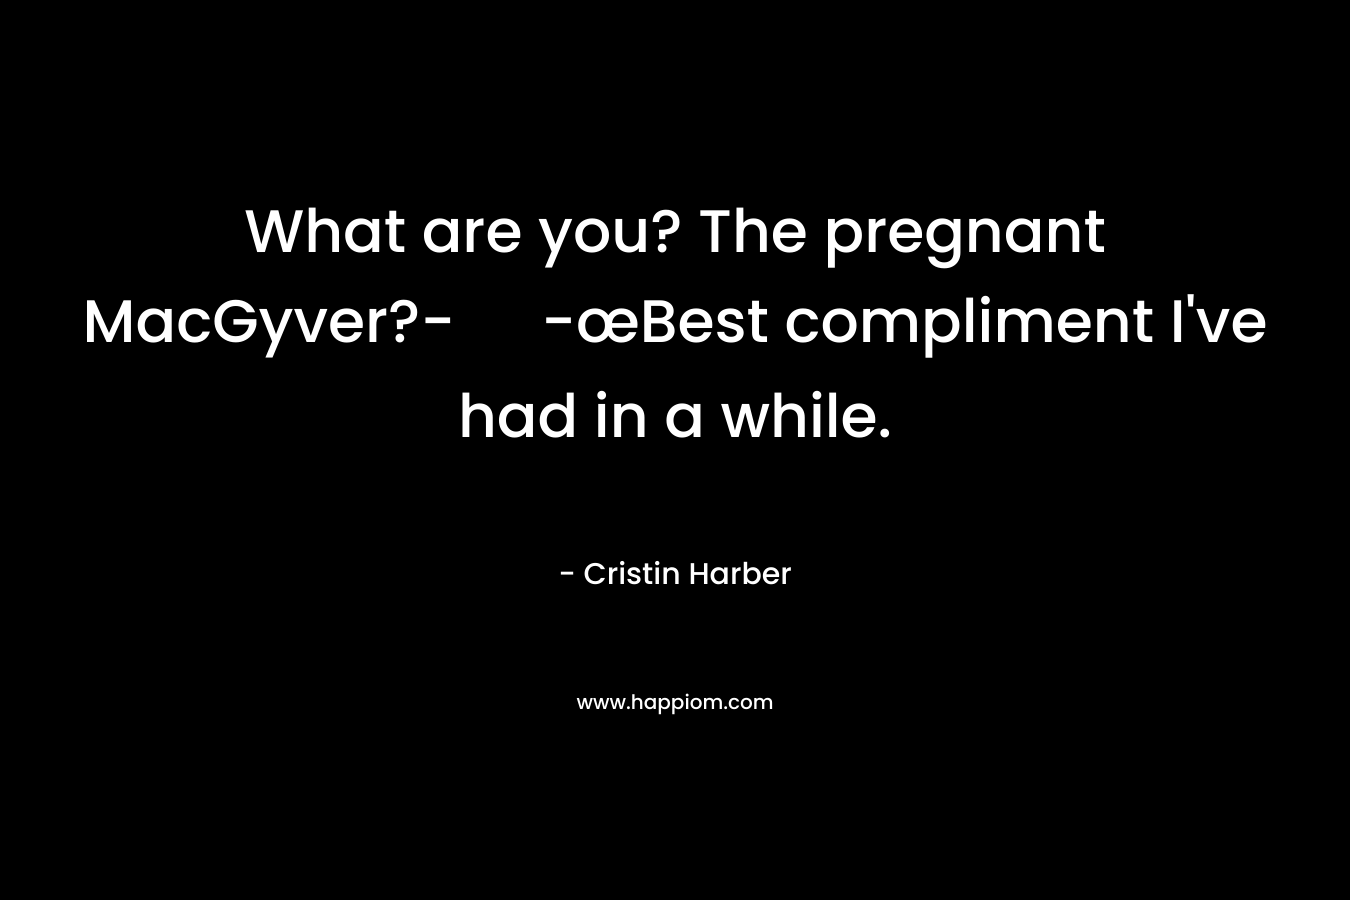 What are you? The pregnant MacGyver?- -œBest compliment I've had in a while.